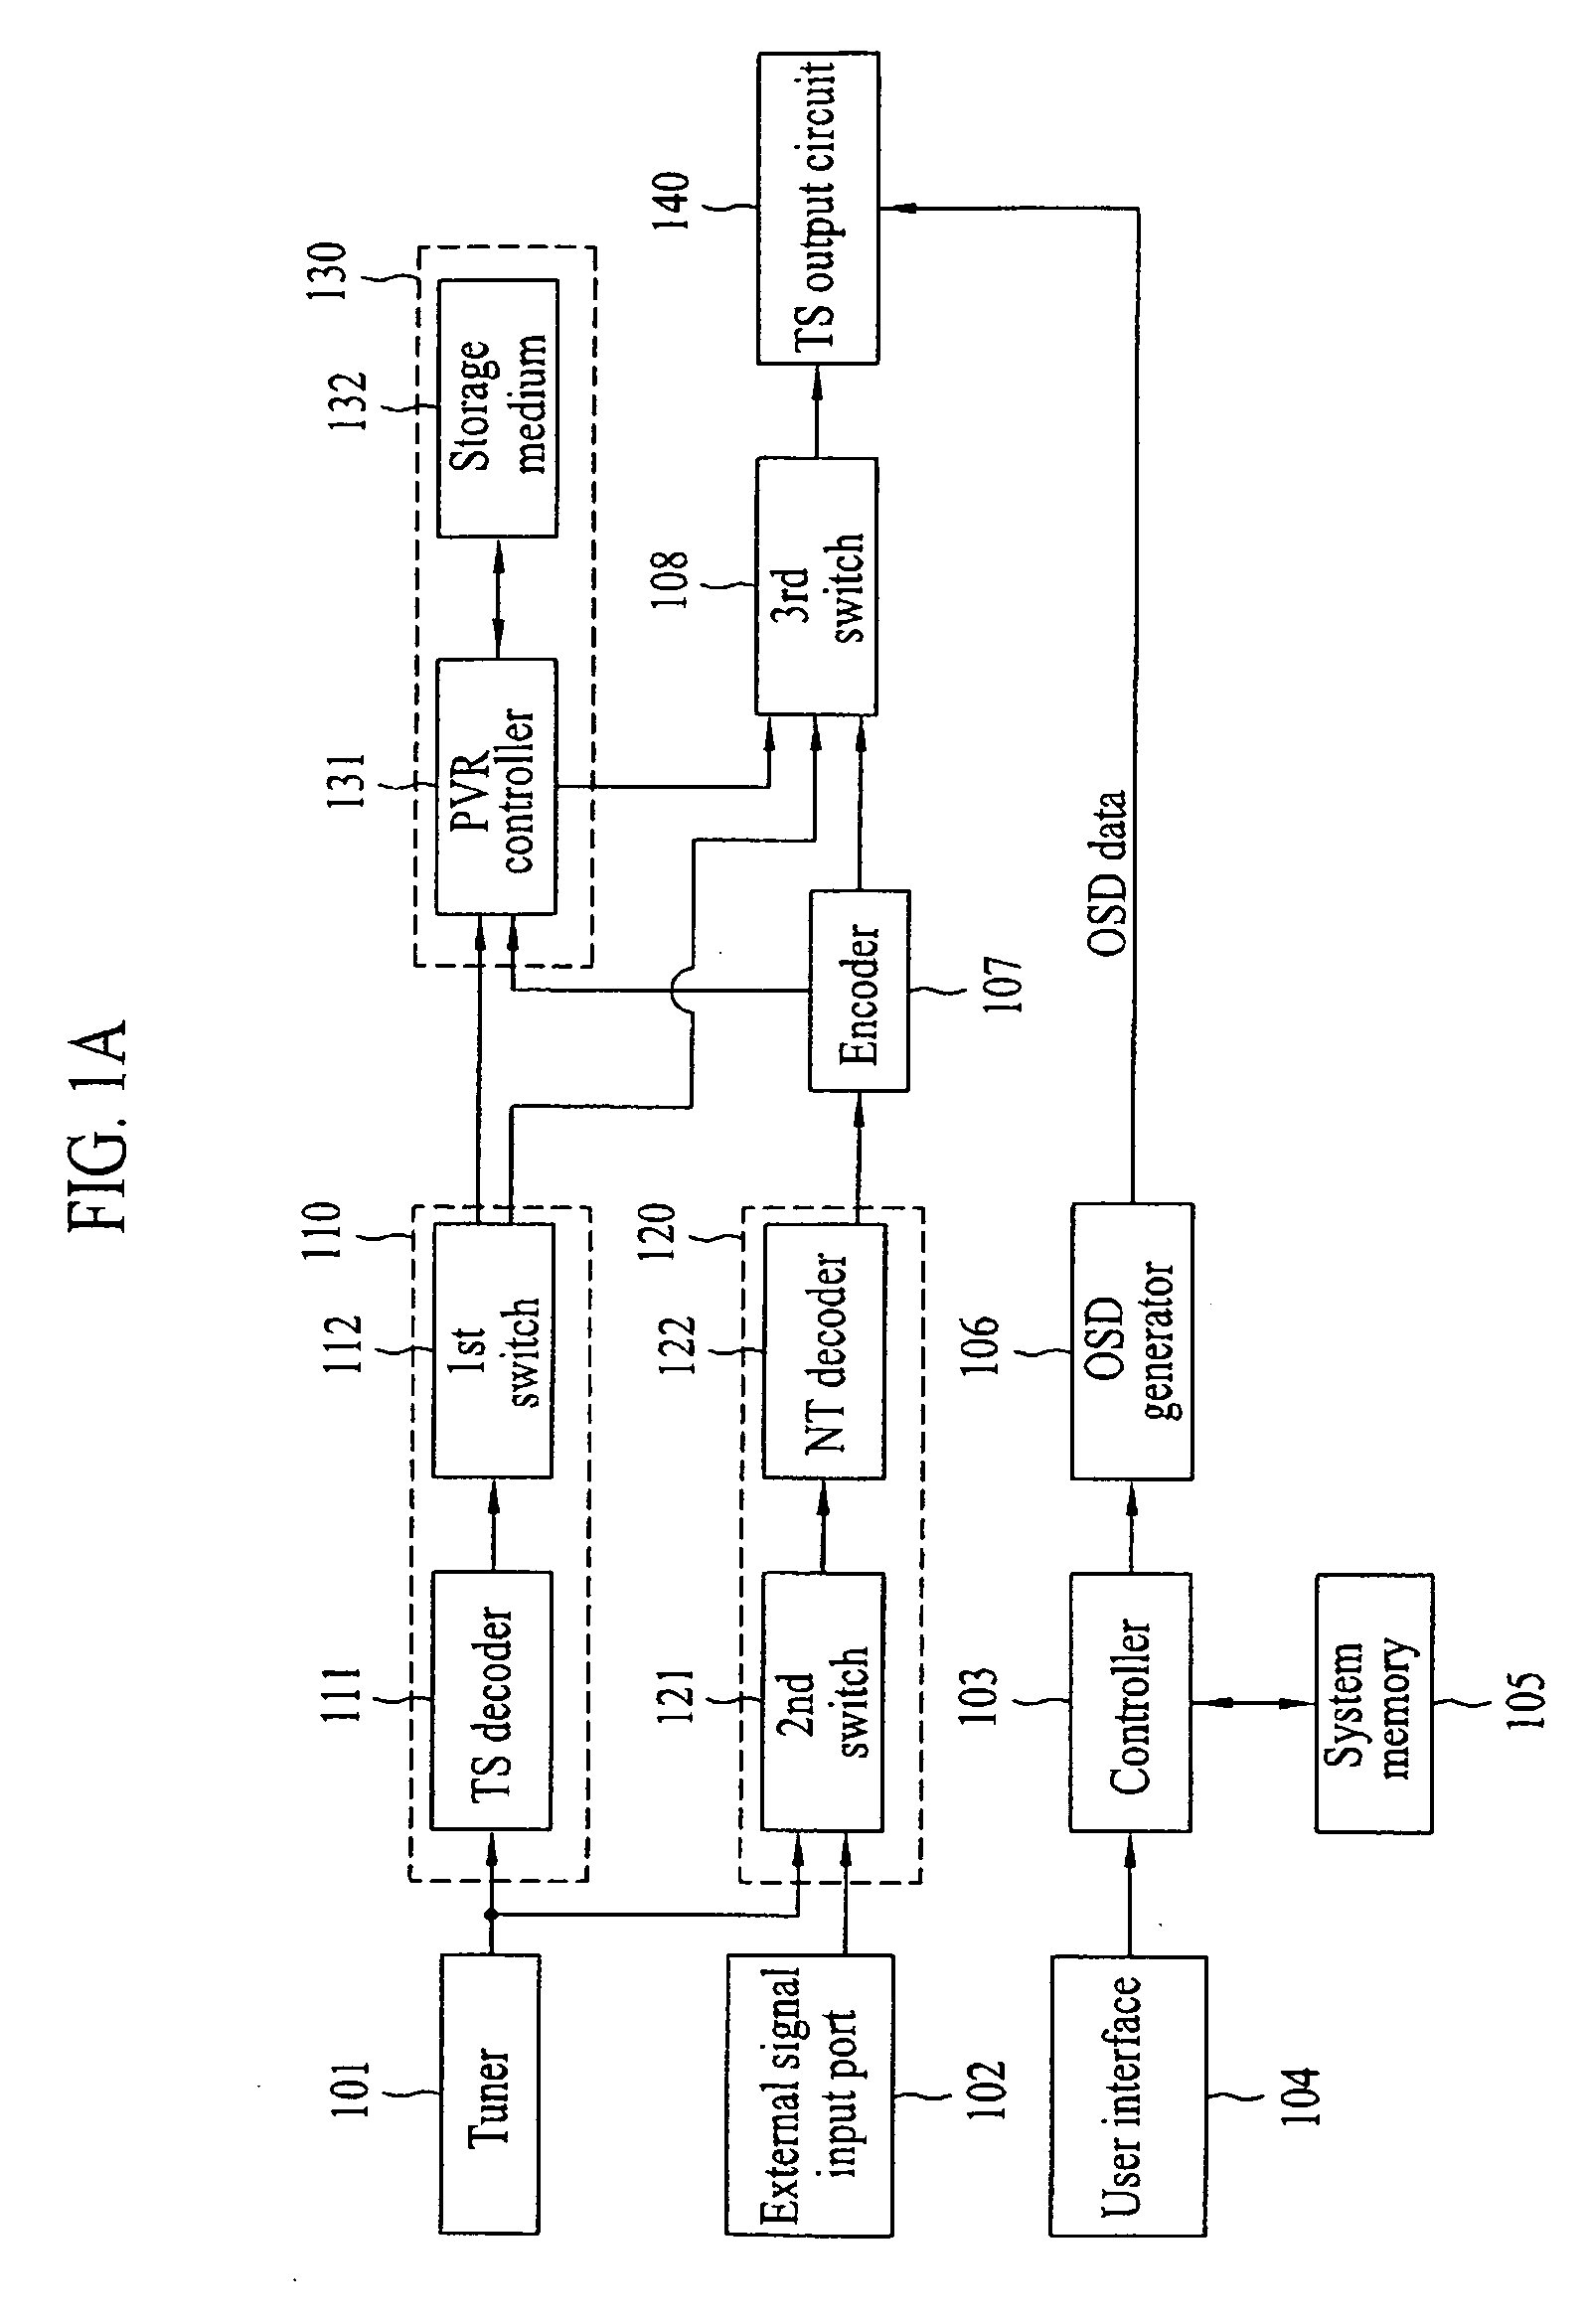 Method of searching scenes recorded in PVR and television receiver using the same